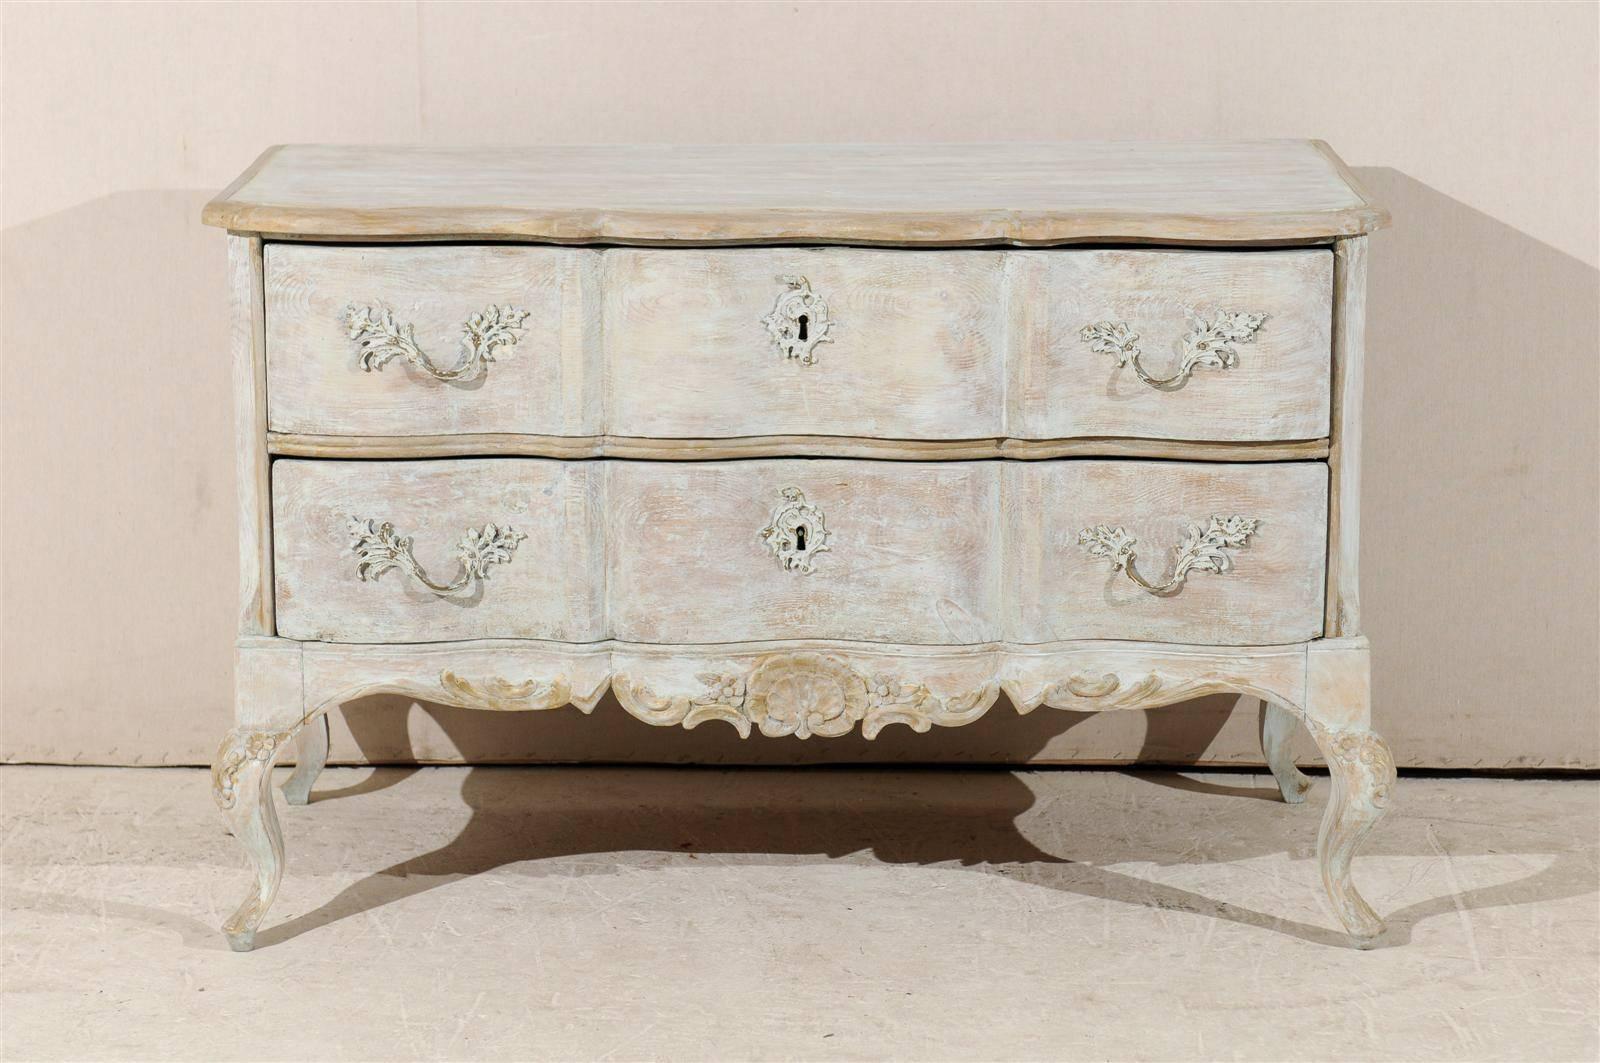 A Swedish 19th century painted wood two-drawer chest with short cabriole legs, nicely scalloped skirt with shell carving and Rococo style hardware.